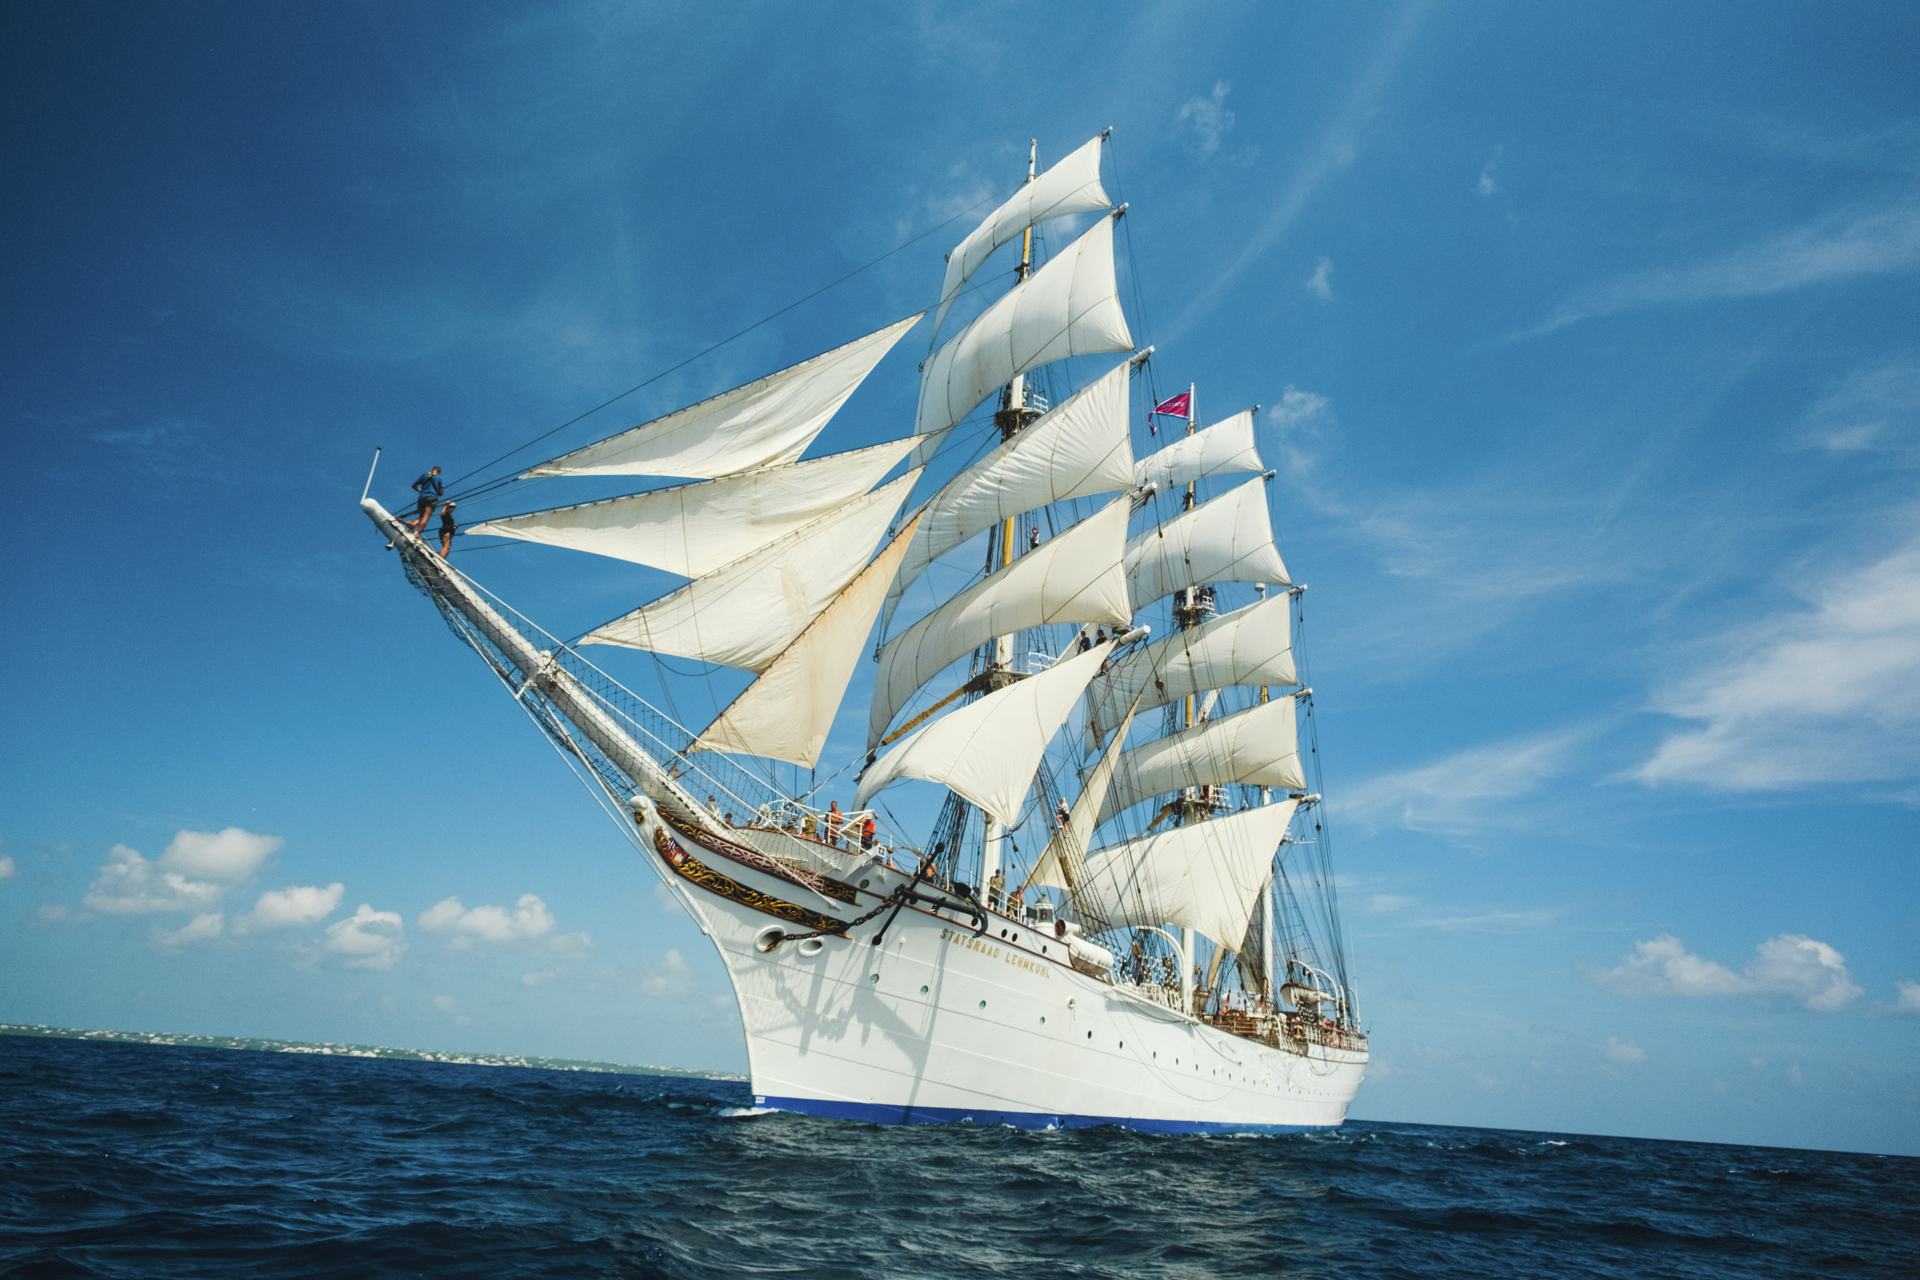 The tall ship Statsraad Lehmkuhl during the ongoing One Ocean Expedition. You could be part of the expedition next year and have an exciting and unforgettable experience if you apply for our training course! We will be sailing along the southeastern coast of Africa - Will you join us onboard? Photo: Isak Okkenhaug/Statsraad Lehmkuhl